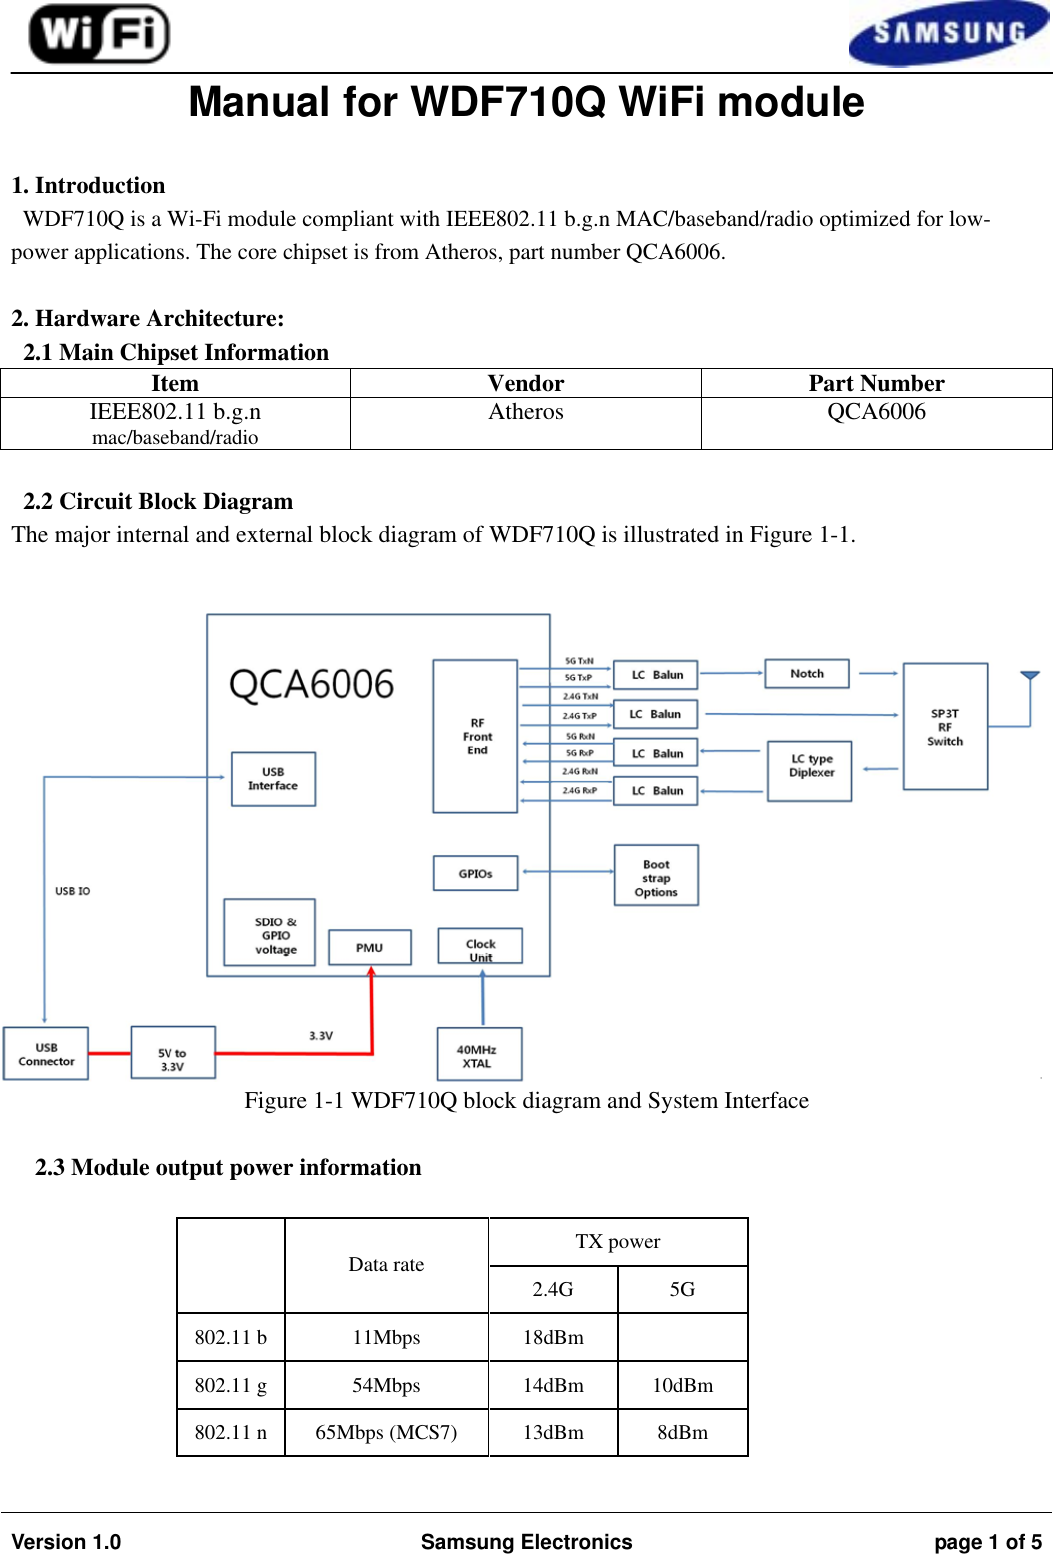                                                                                                                                         Version 1.0  Samsung Electronics  page 1 of 5   Manual for WDF710Q WiFi module  1. Introduction WDF710Q is a Wi-Fi module compliant with IEEE802.11 b.g.n MAC/baseband/radio optimized for low-power applications. The core chipset is from Atheros, part number QCA6006.  2. Hardware Architecture: 2.1 Main Chipset Information Item Vendor Part Number IEEE802.11 b.g.n mac/baseband/radio Atheros QCA6006  2.2 Circuit Block Diagram The major internal and external block diagram of WDF710Q is illustrated in Figure 1-1.   Figure 1-1 WDF710Q block diagram and System Interface  2.3 Module output power information  TX power      Data rate   2.4G 5G 802.11 b 11Mbps  18dBm    802.11 g 54Mbps  14dBm  10dBm 802.11 n 65Mbps (MCS7)  13dBm  8dBm 